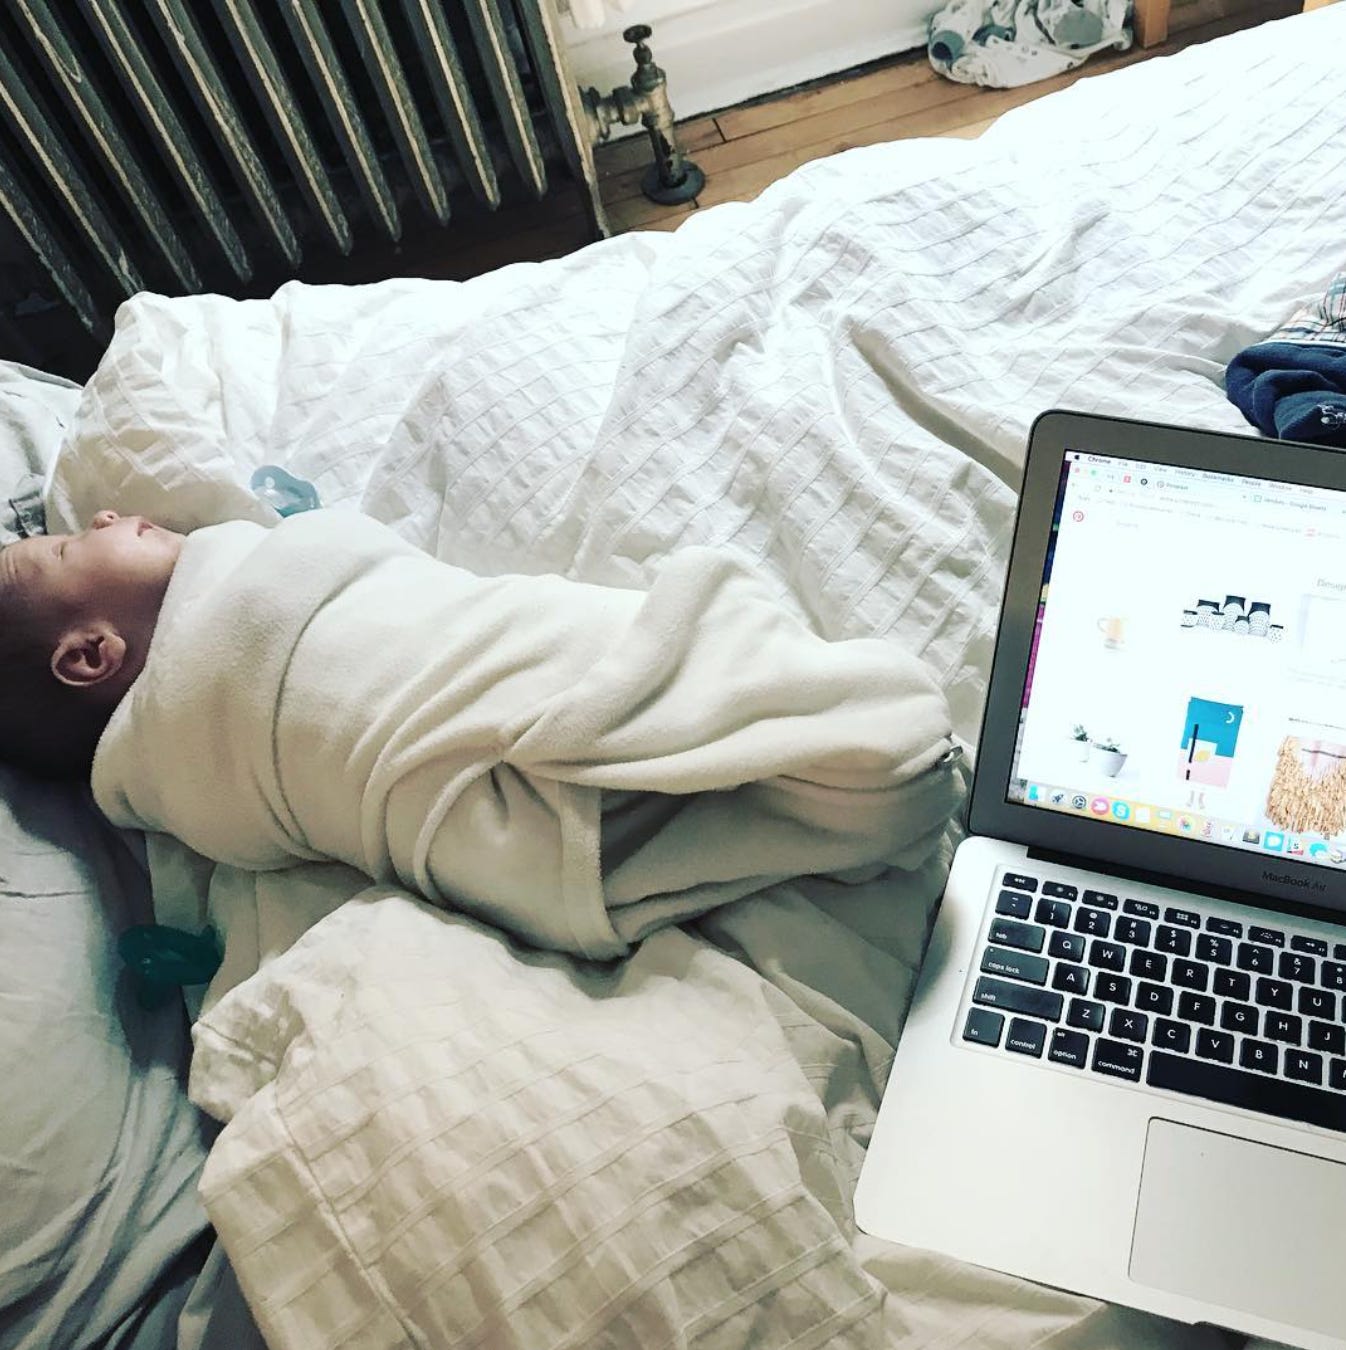 laptop open on bed next to sleeping baby